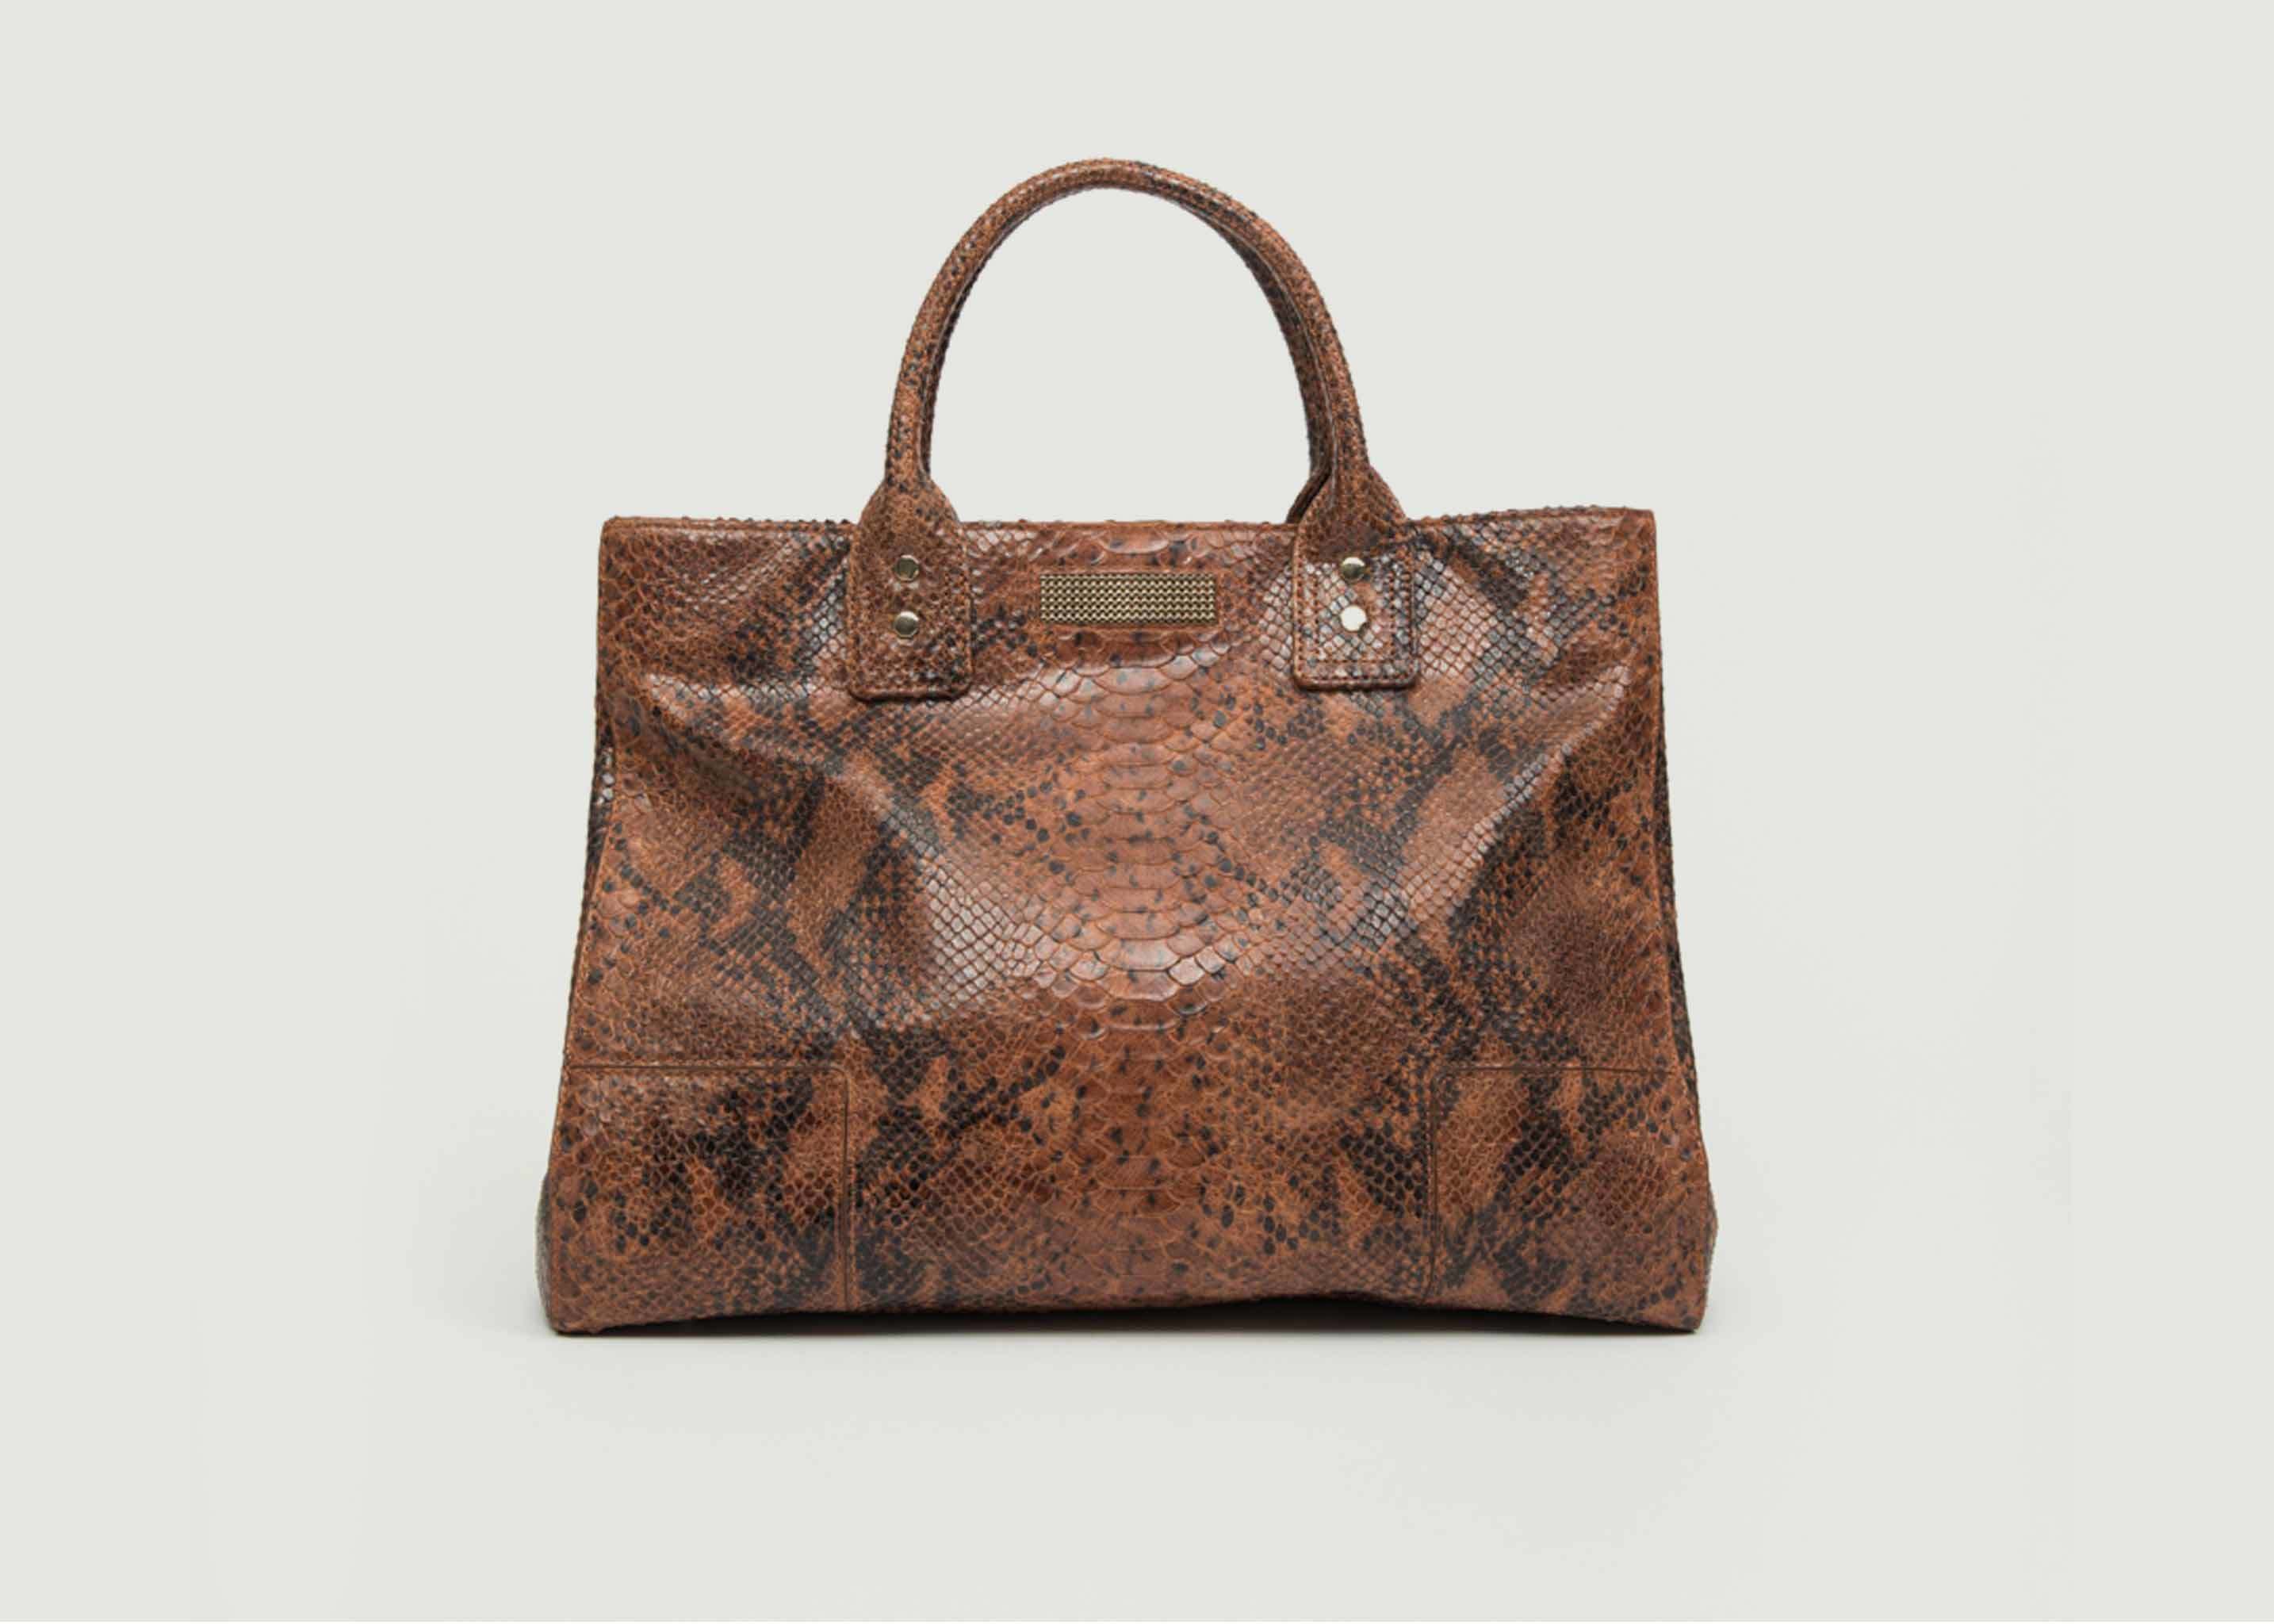 Clio Python Effect Leather Tote Bag - Clio Goldbrenner